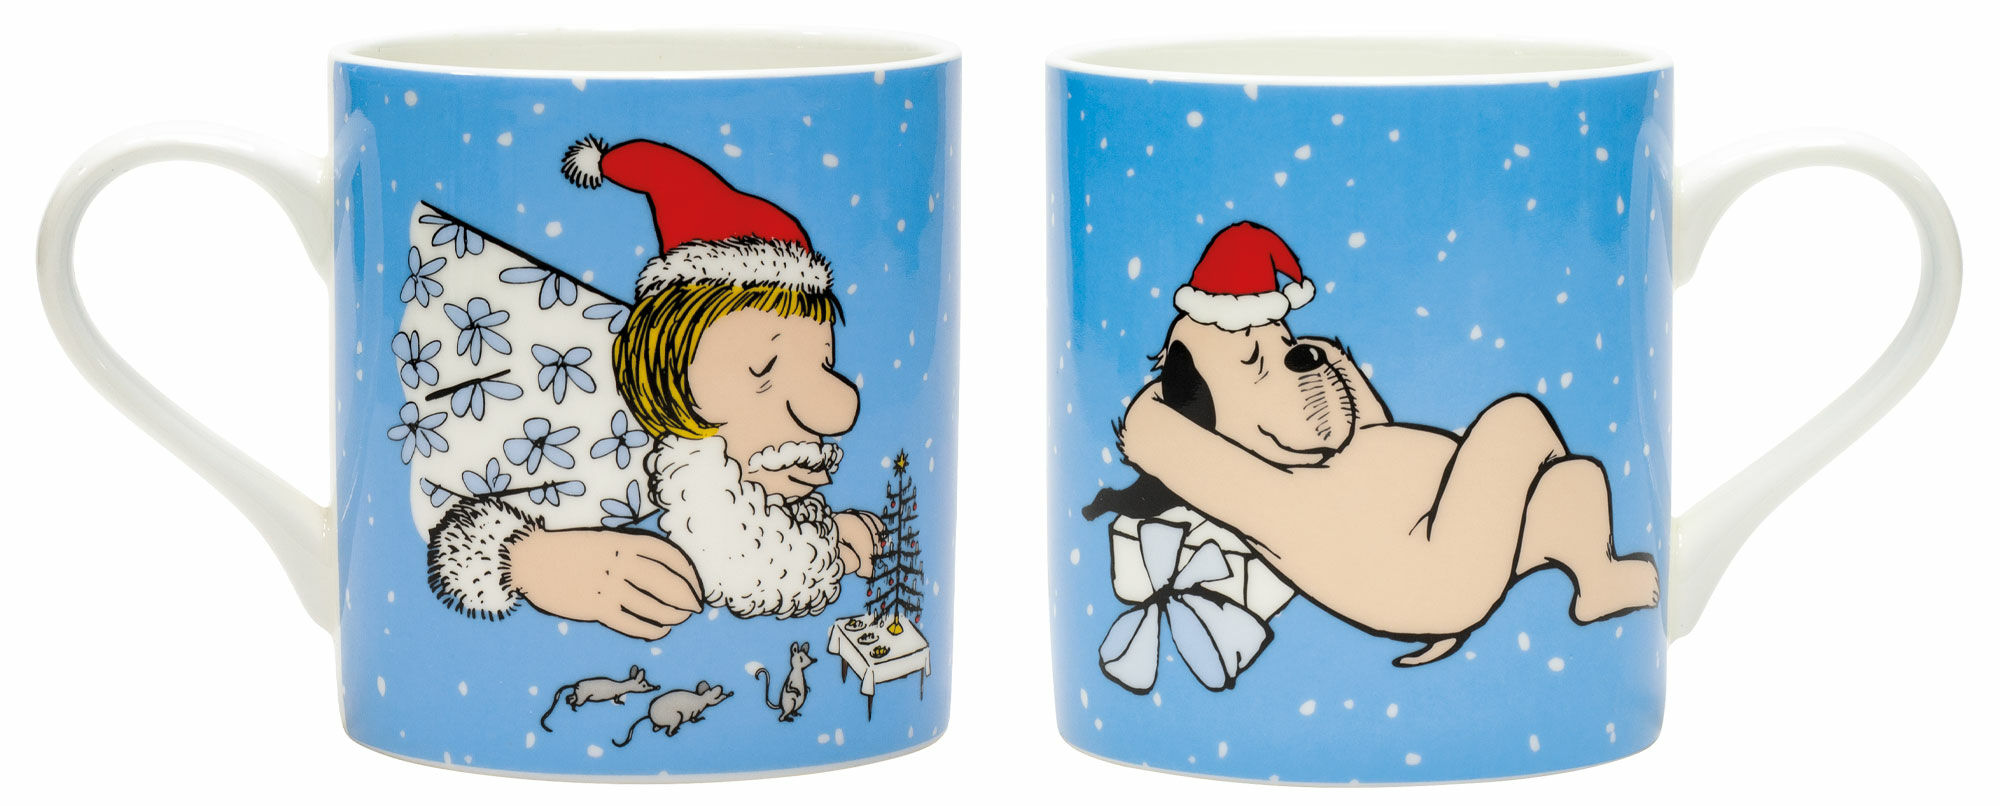 Set of 2 mugs with artist's motifs "Mrs Santa Claus" & "Christmas Wum", porcelain by Loriot